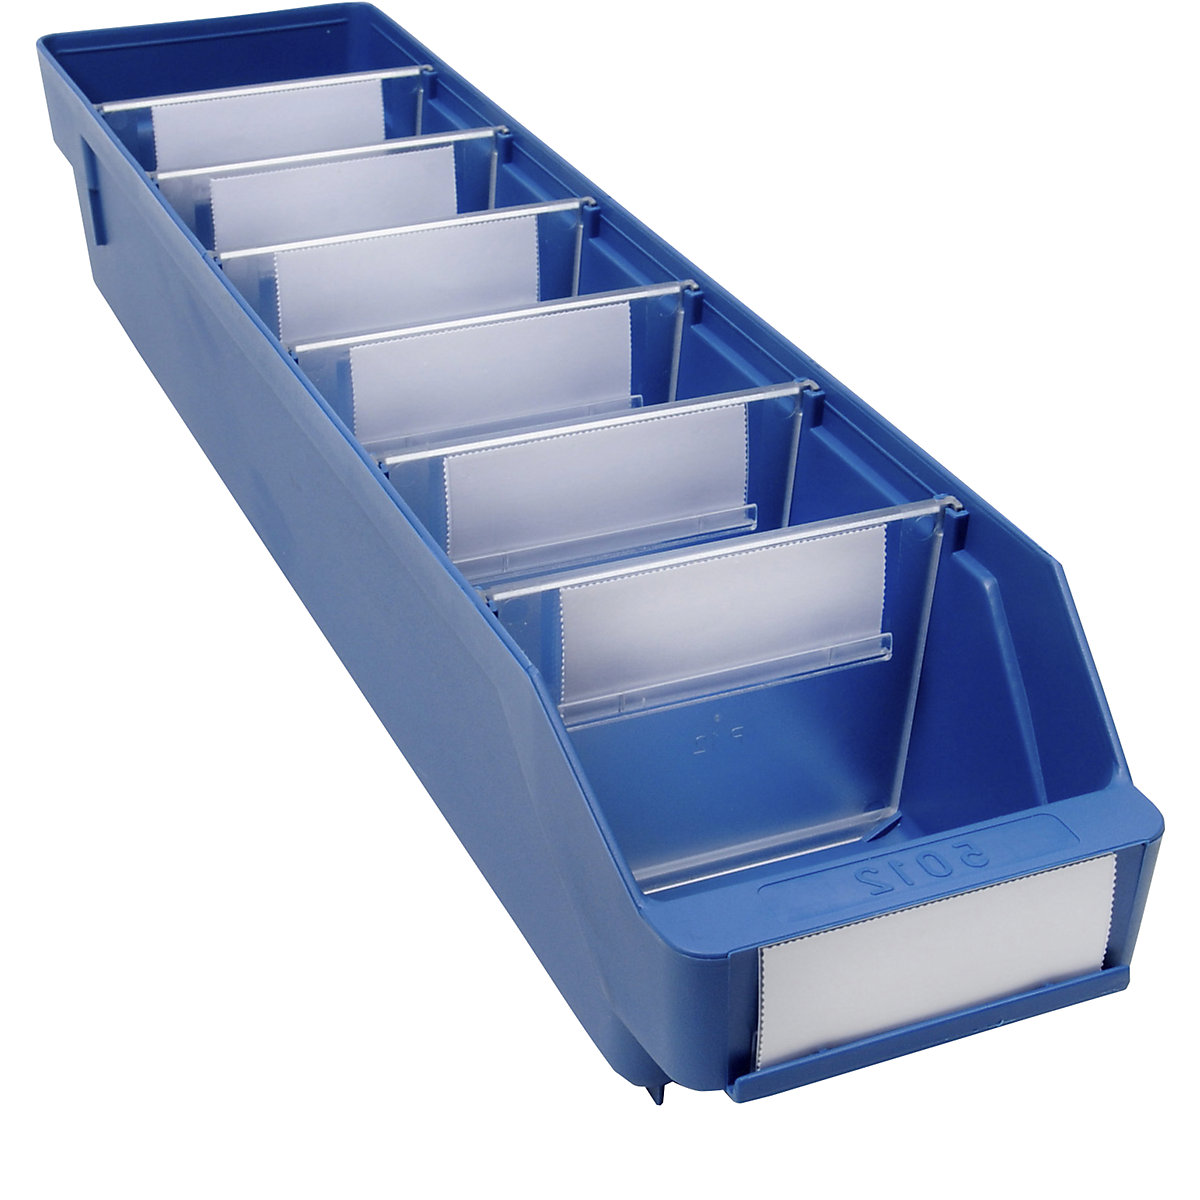 Shelf bin made of highly impact resistant polypropylene – STEMO, blue, LxWxH 500 x 118 x 95 mm, pack of 30-21